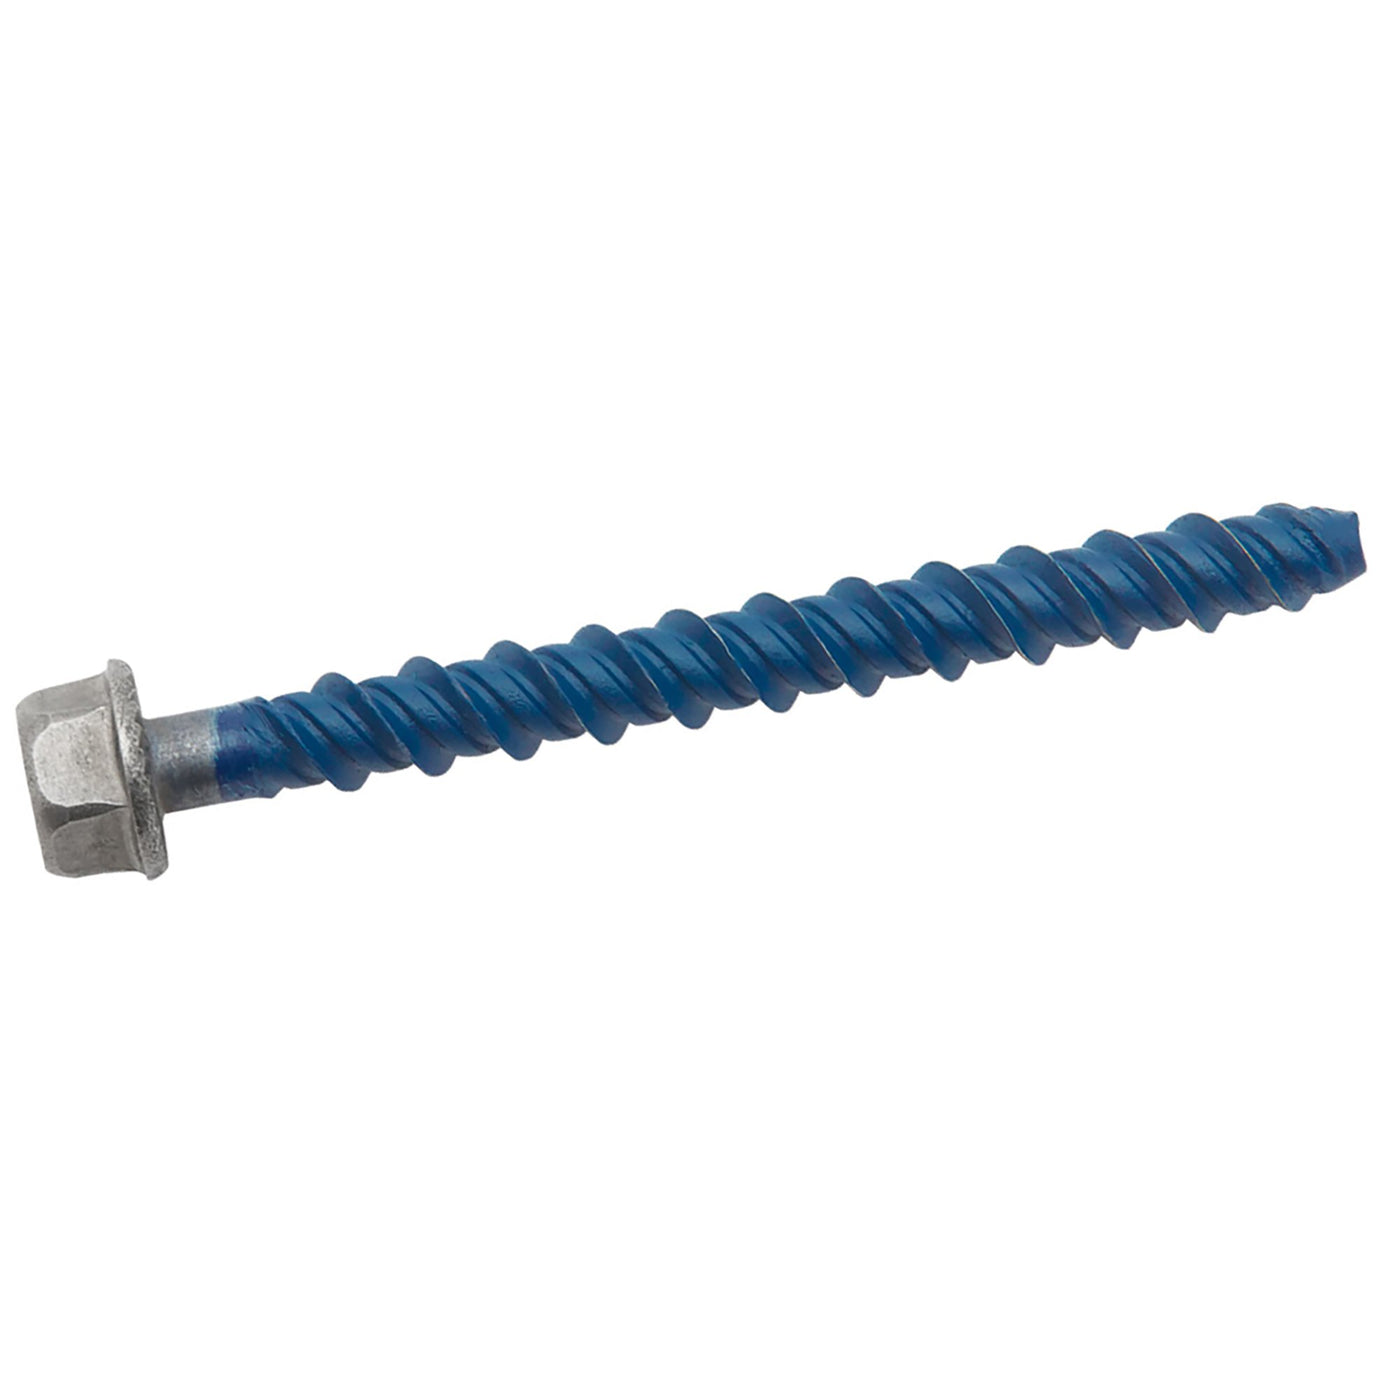 1/2 x 6 Powers Wedge-Bolts®+ Concrete Anchor 316 Stainless Steel Bimetal ( 25)